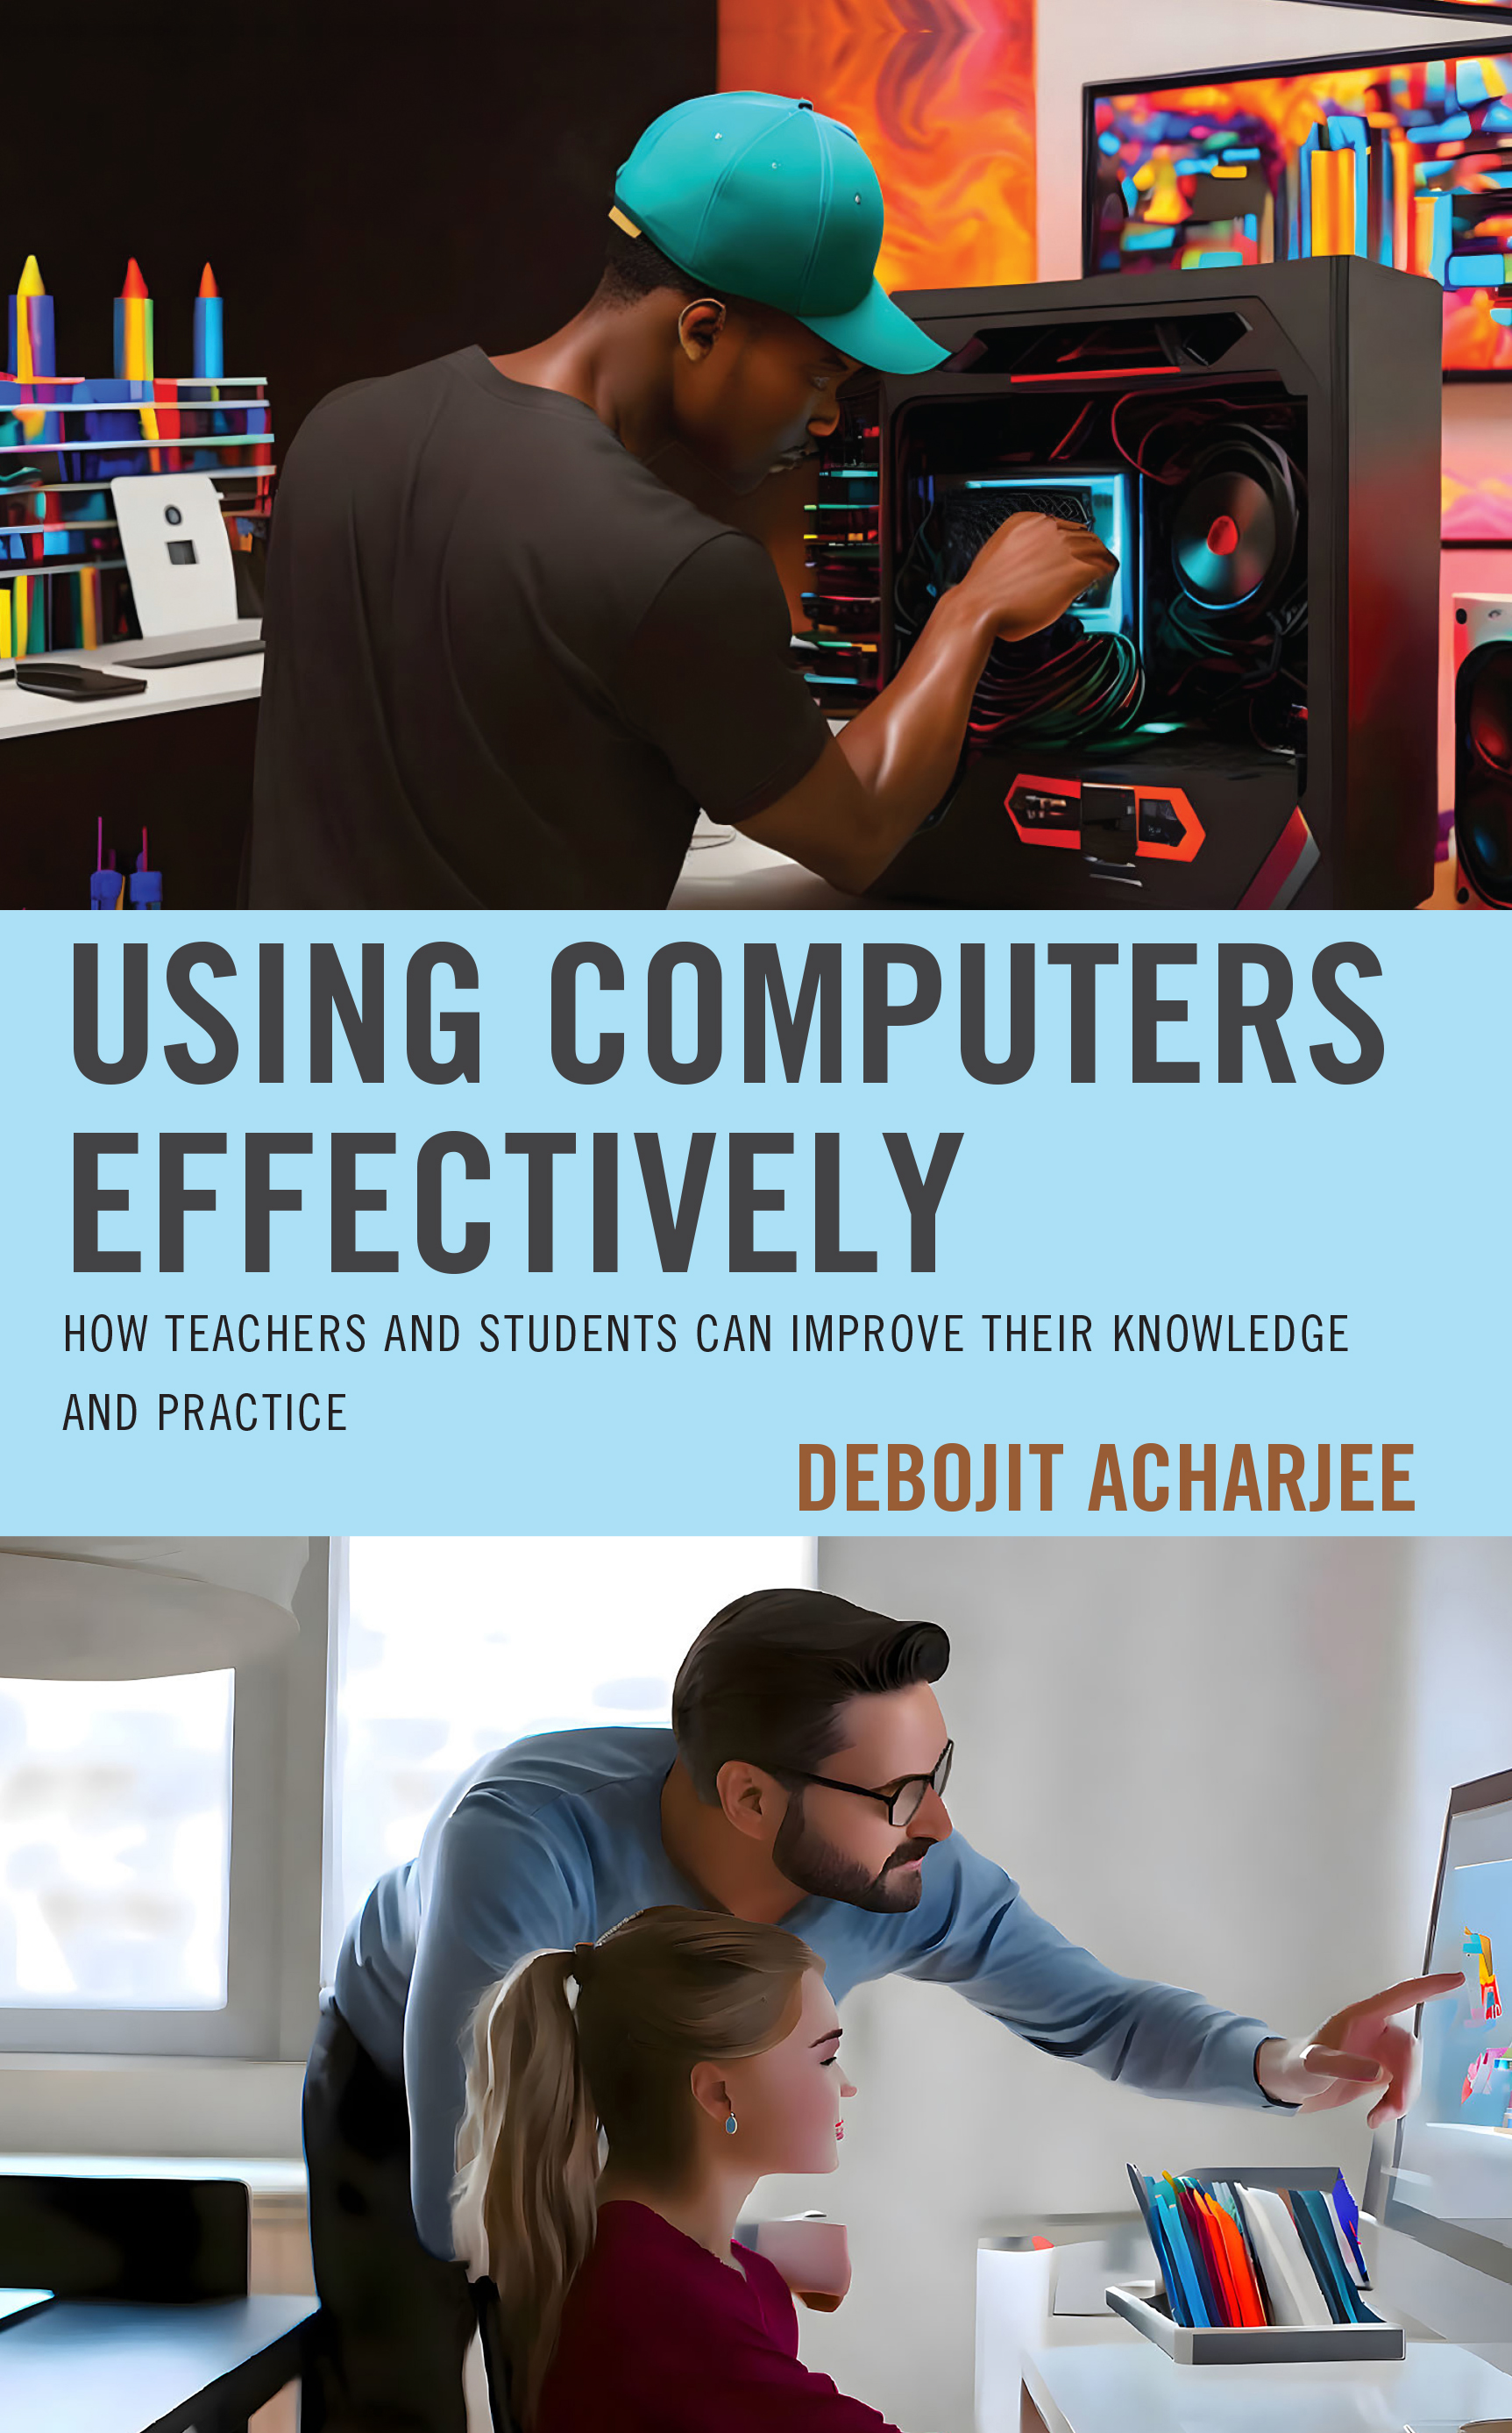 Using Computers Effectively: How Teachers and Students Can Improve Their Knowledge and Practice